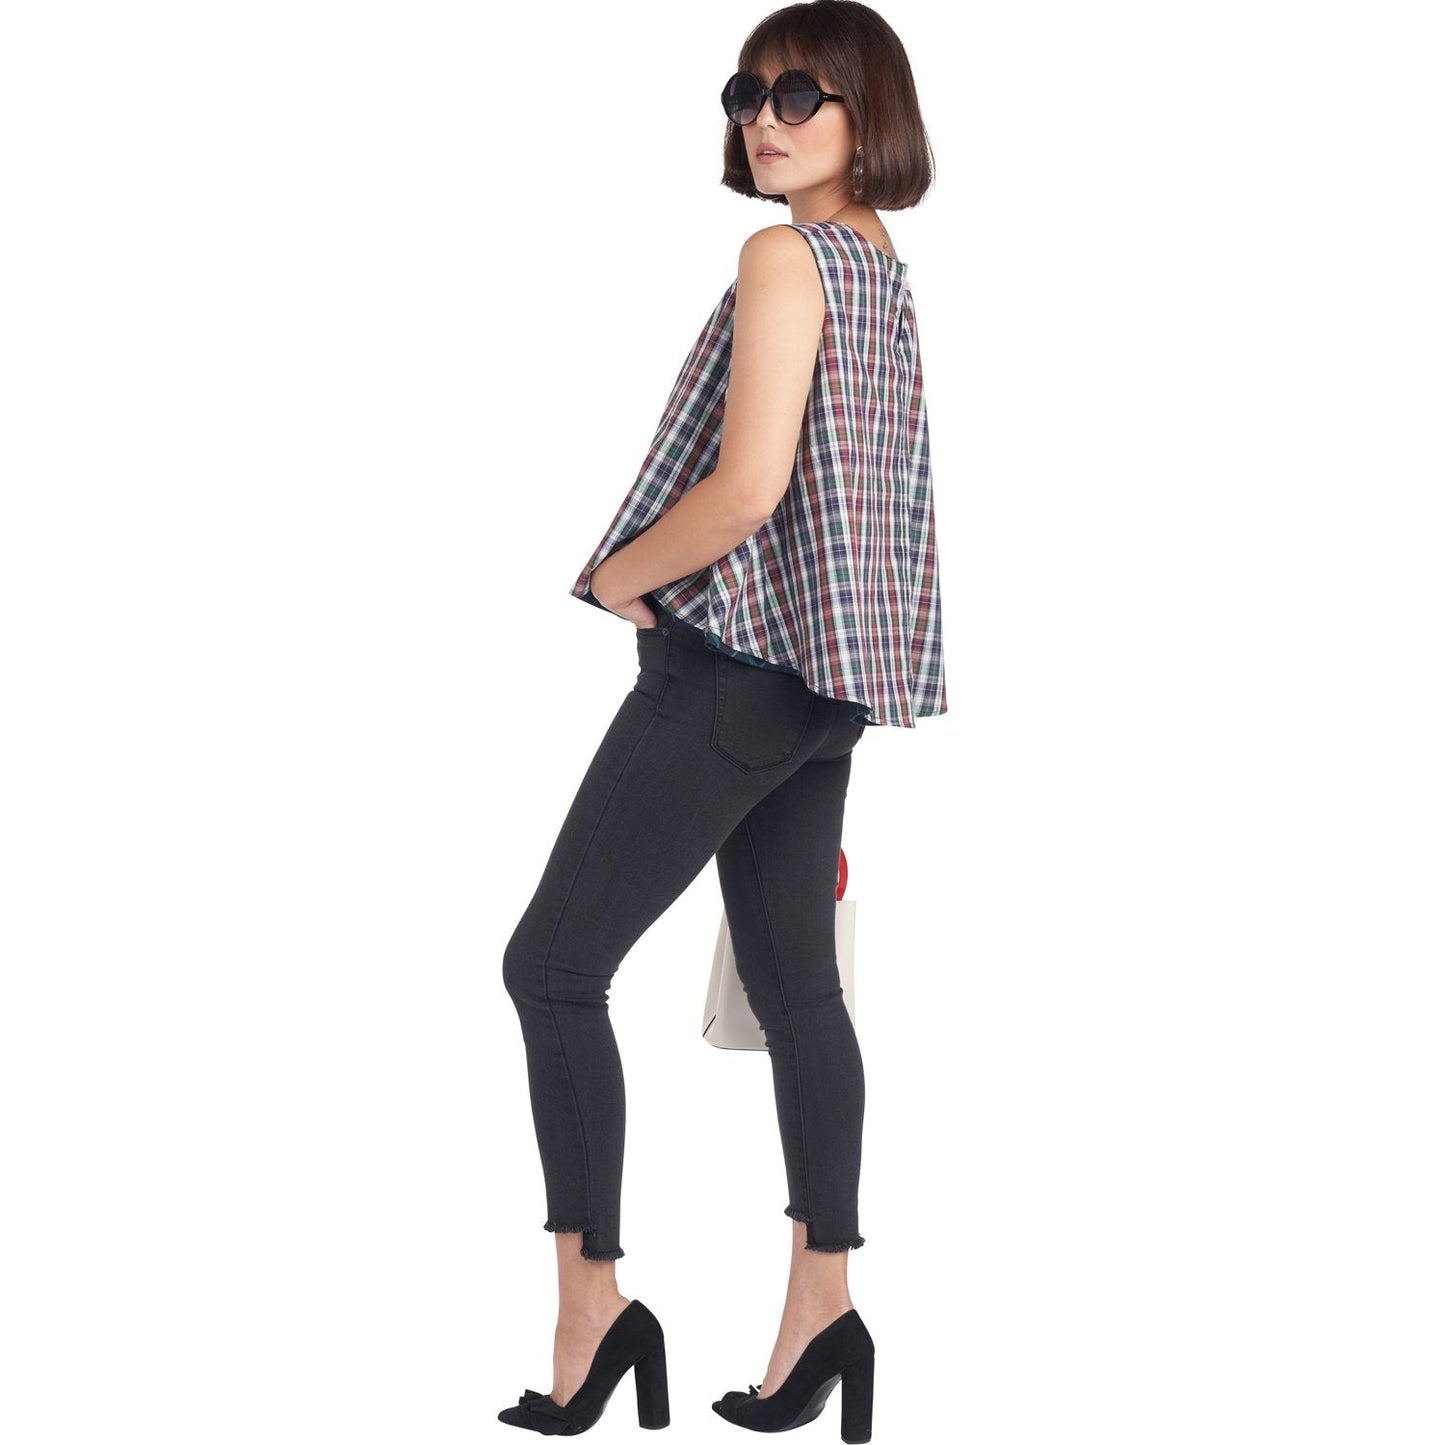 Reversible Swing Top -  Mixed Plaid - Final Sale